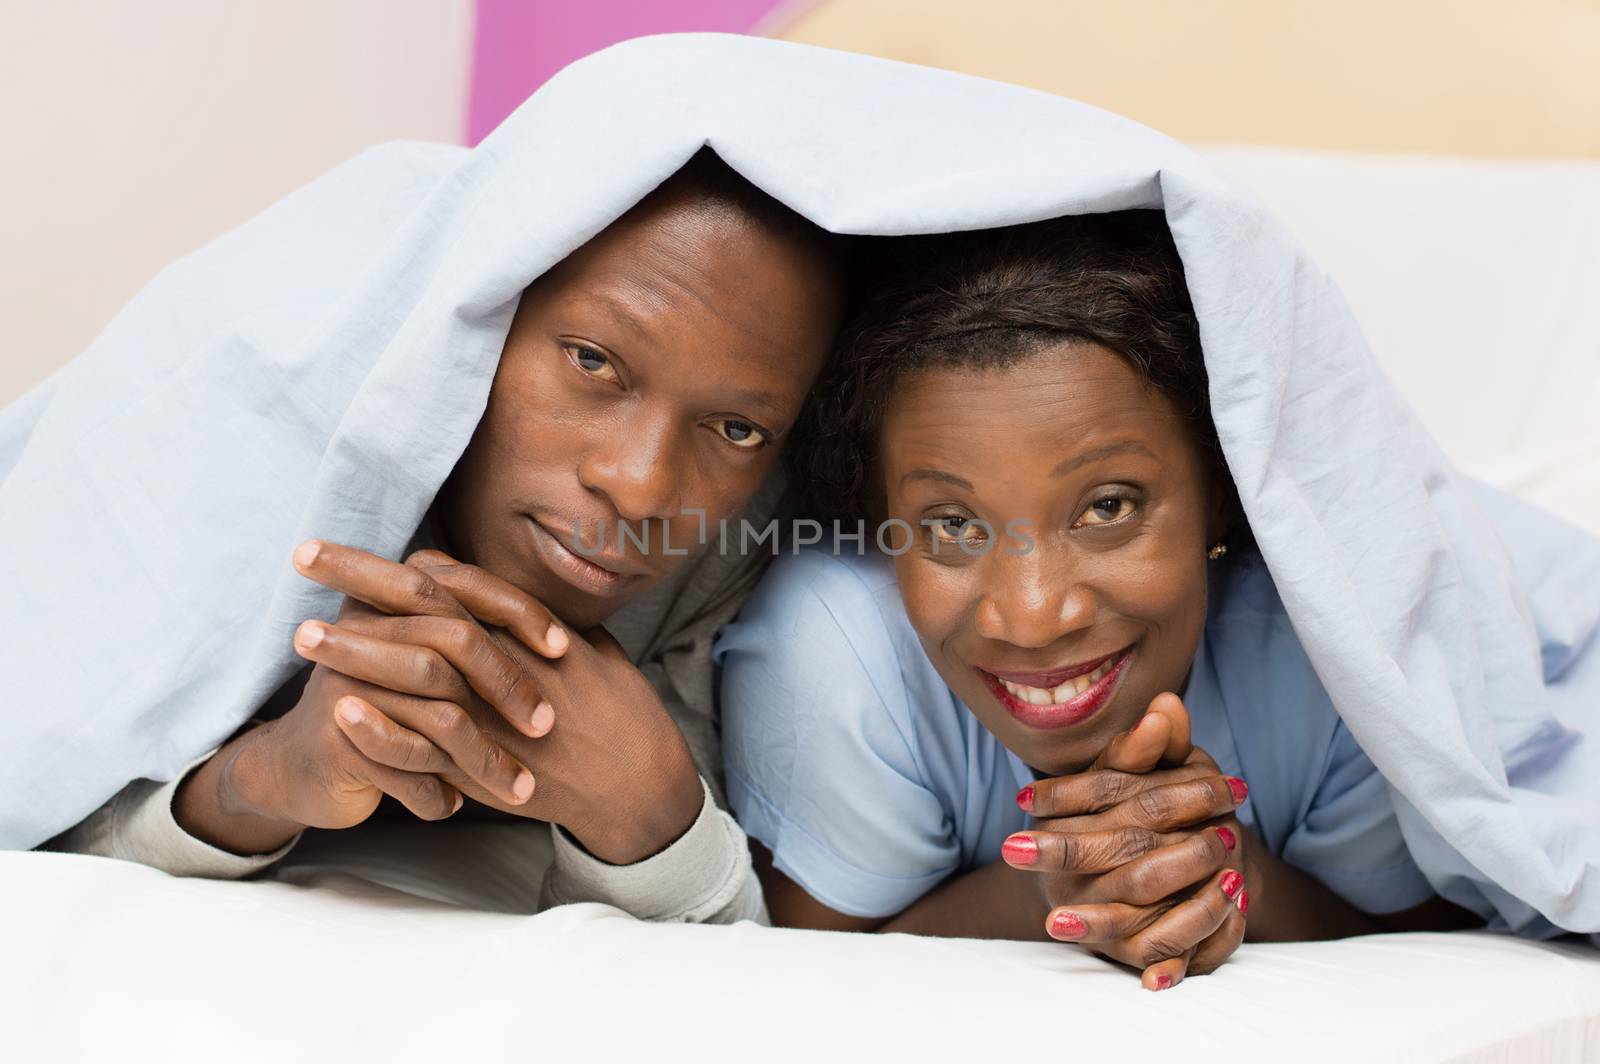 this young couple looks at the camera, smiling under their coverage.